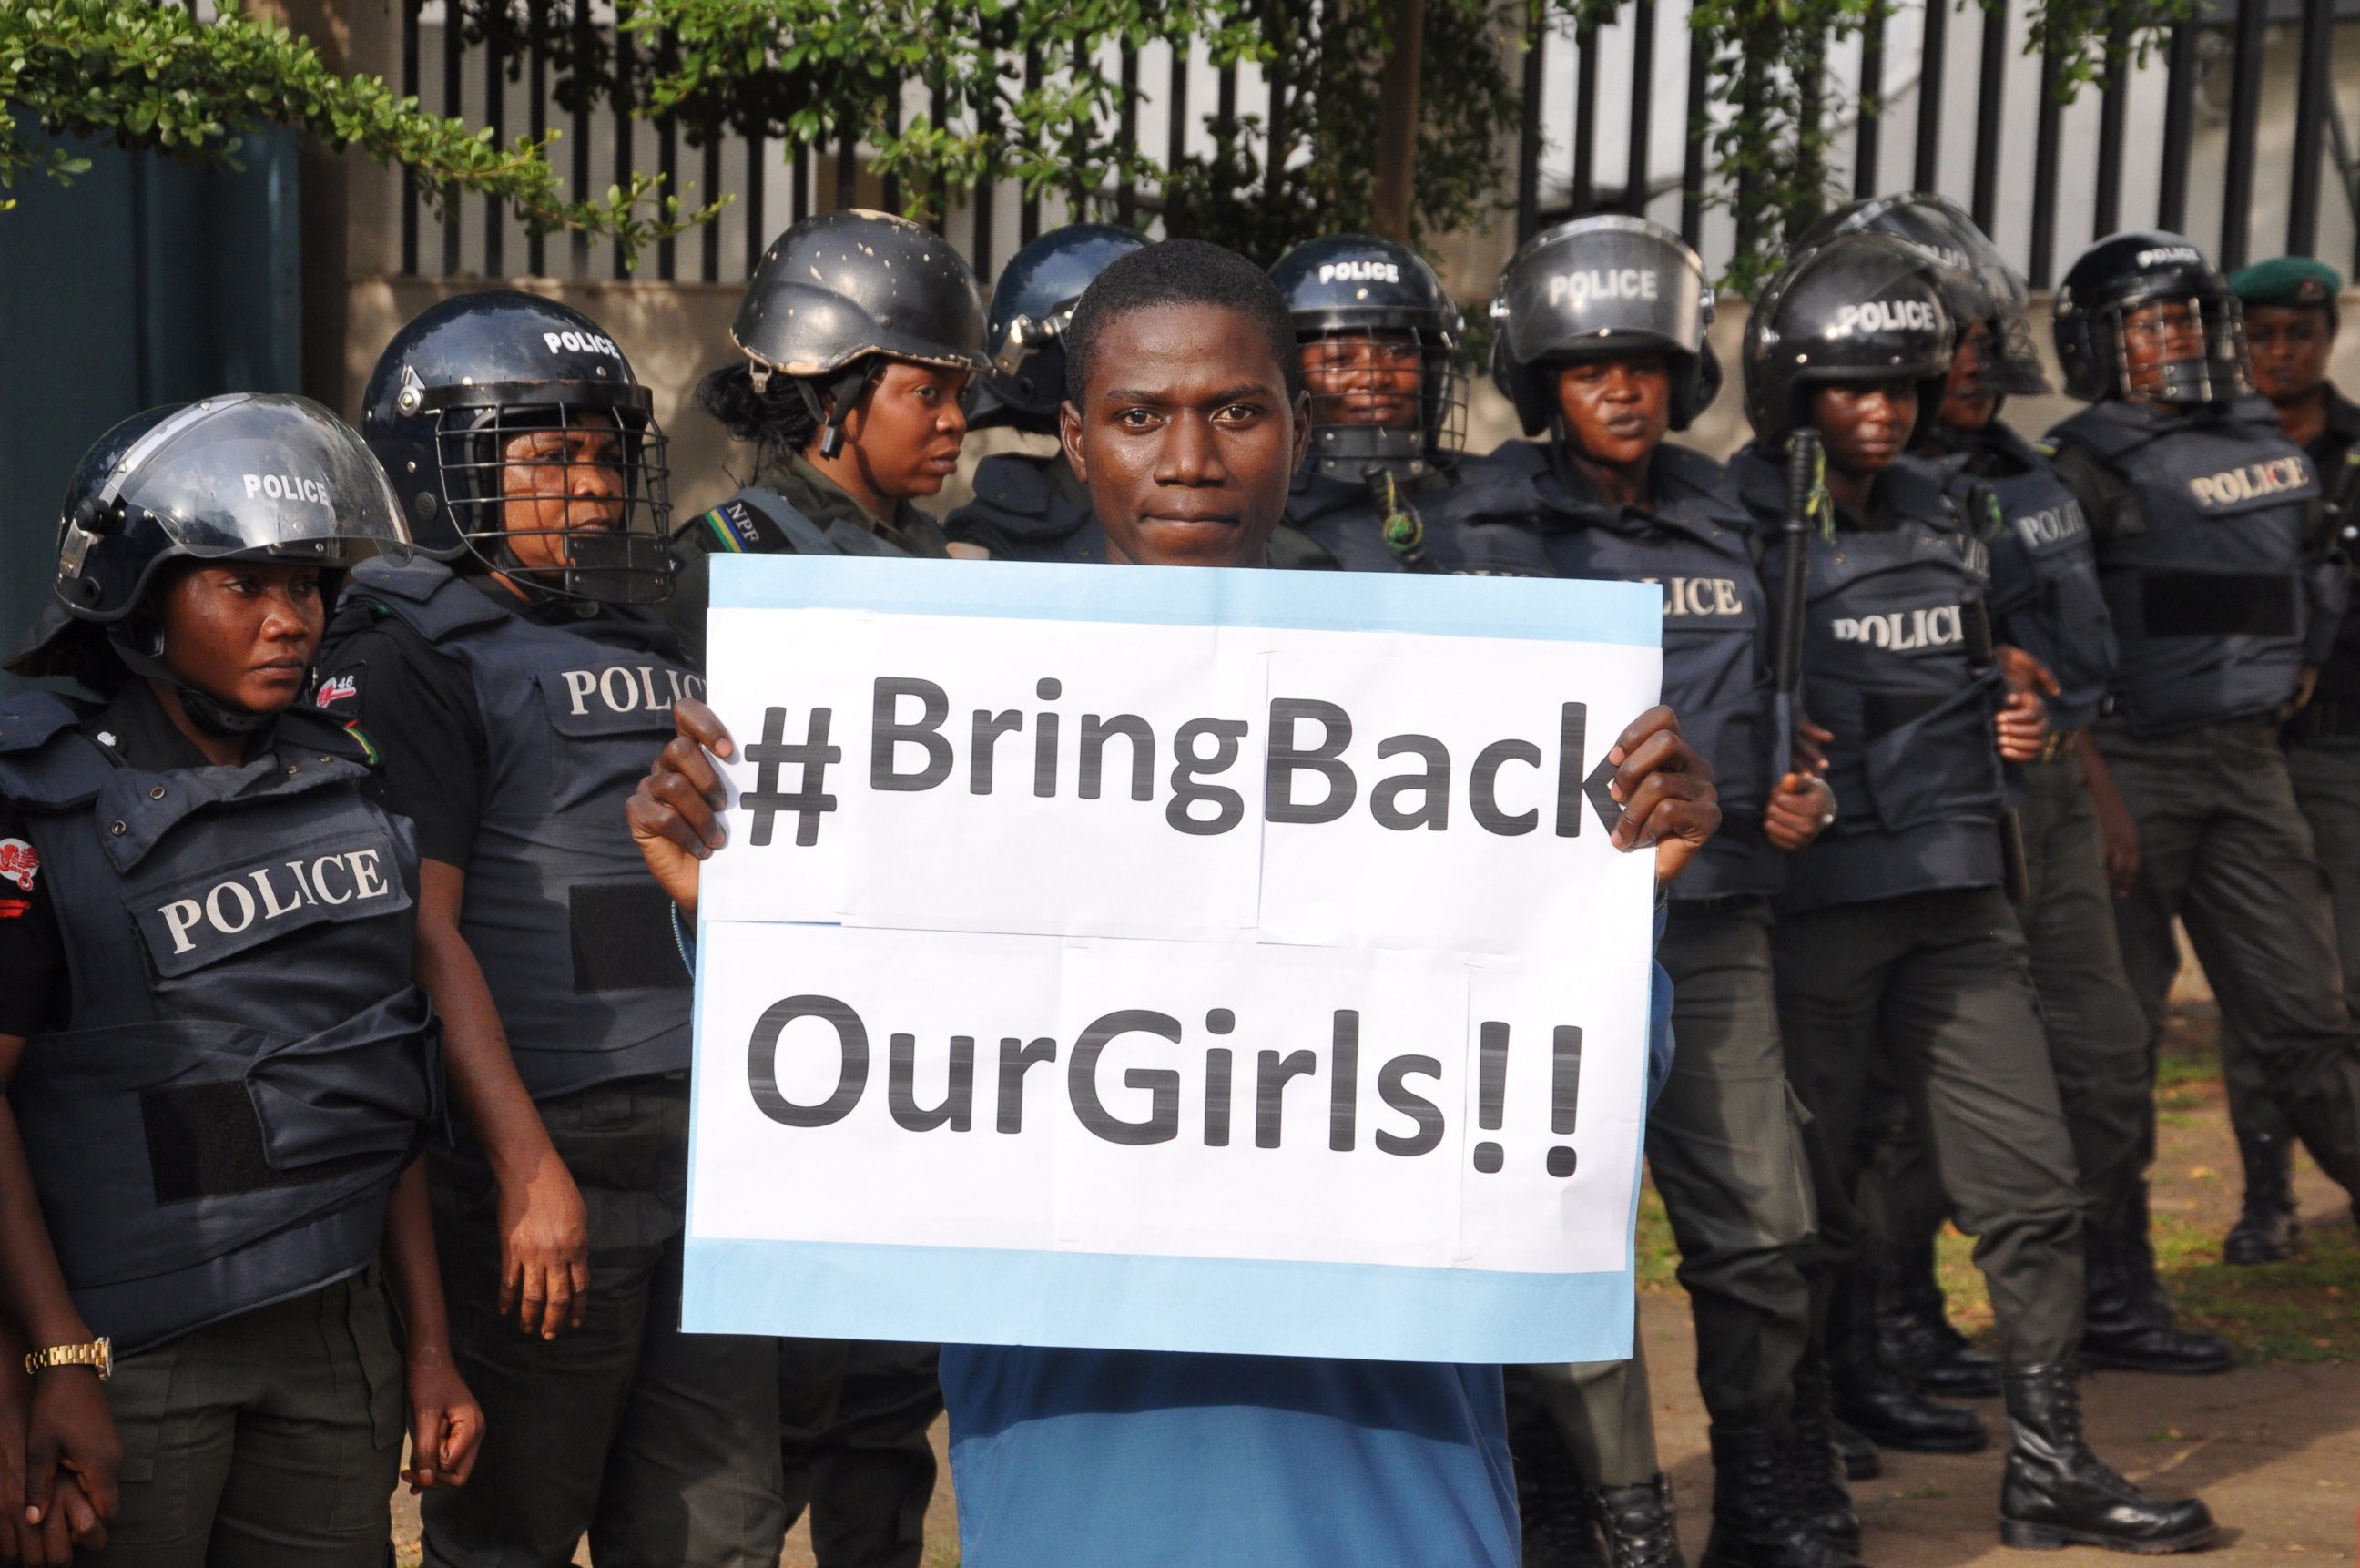 PHOTO: A man poses with a sign in front of police officers during a demonstration calling on the government to rescue the girls taken from the secondary school in Chibok, in Abuja, Nigeria, on Oct. 14, 2014.